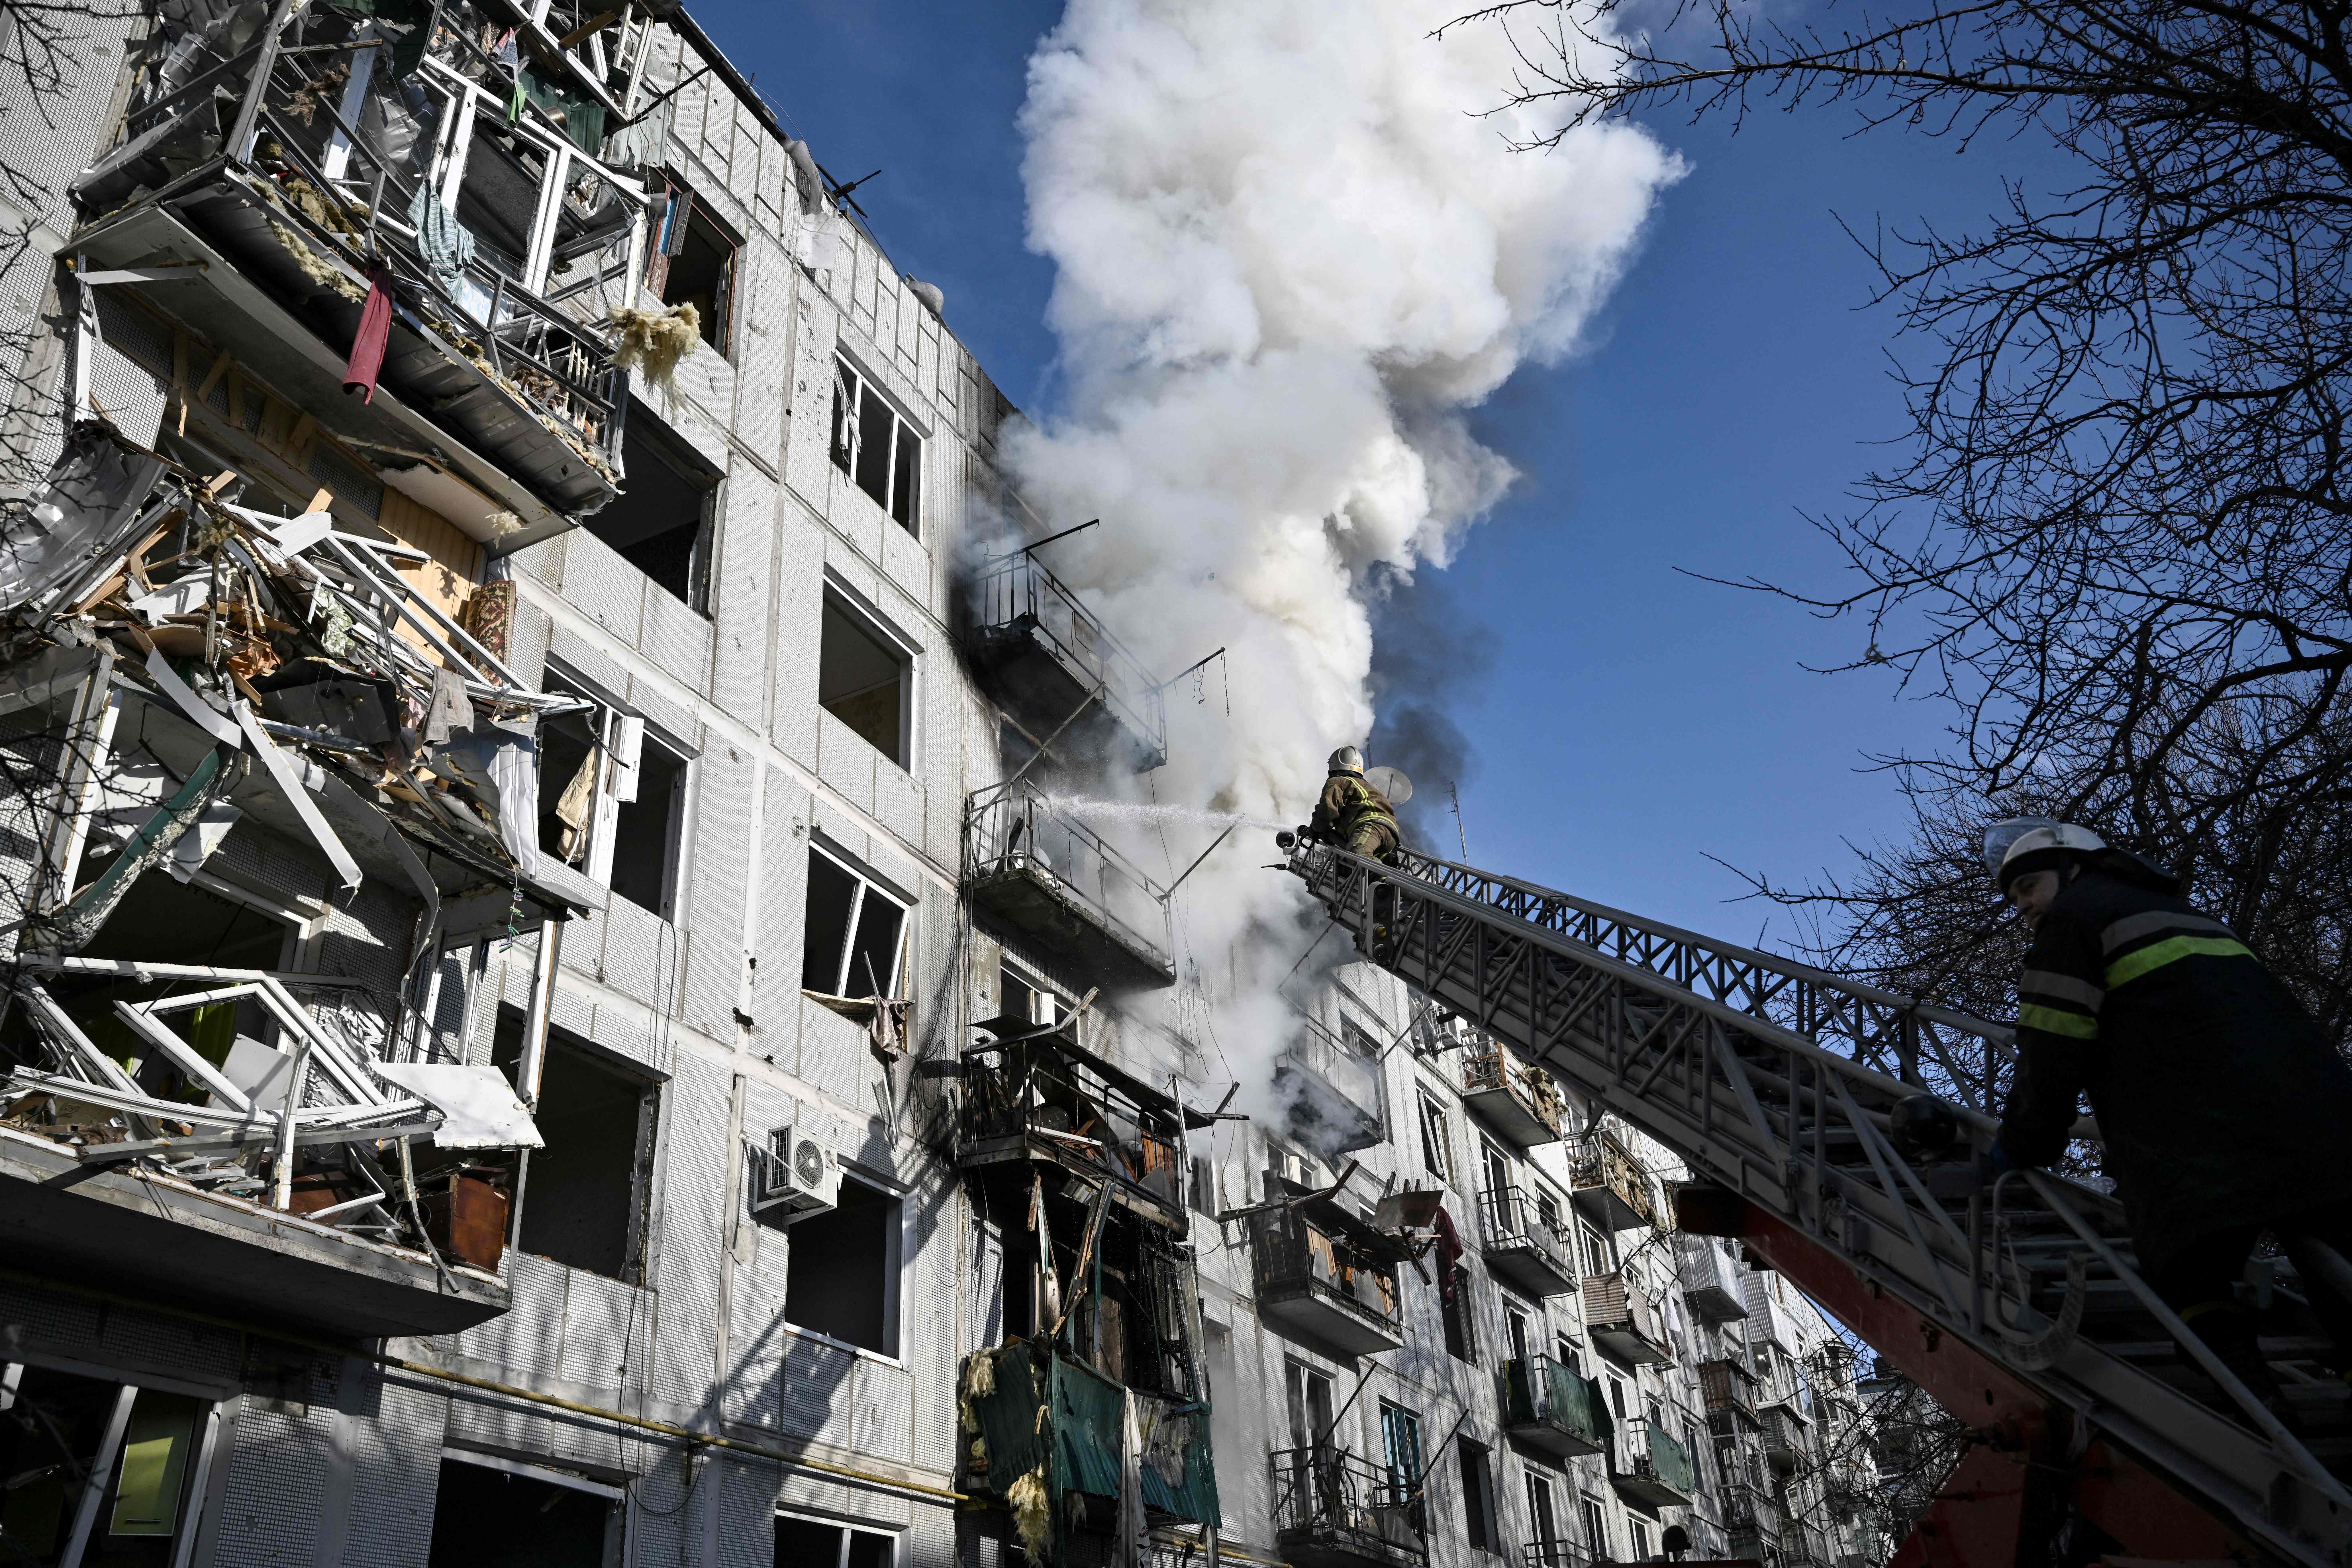 Firefighters work on a fire on a building after bombings on the eastern Ukraine town of Chuguiv on February 24, 2022